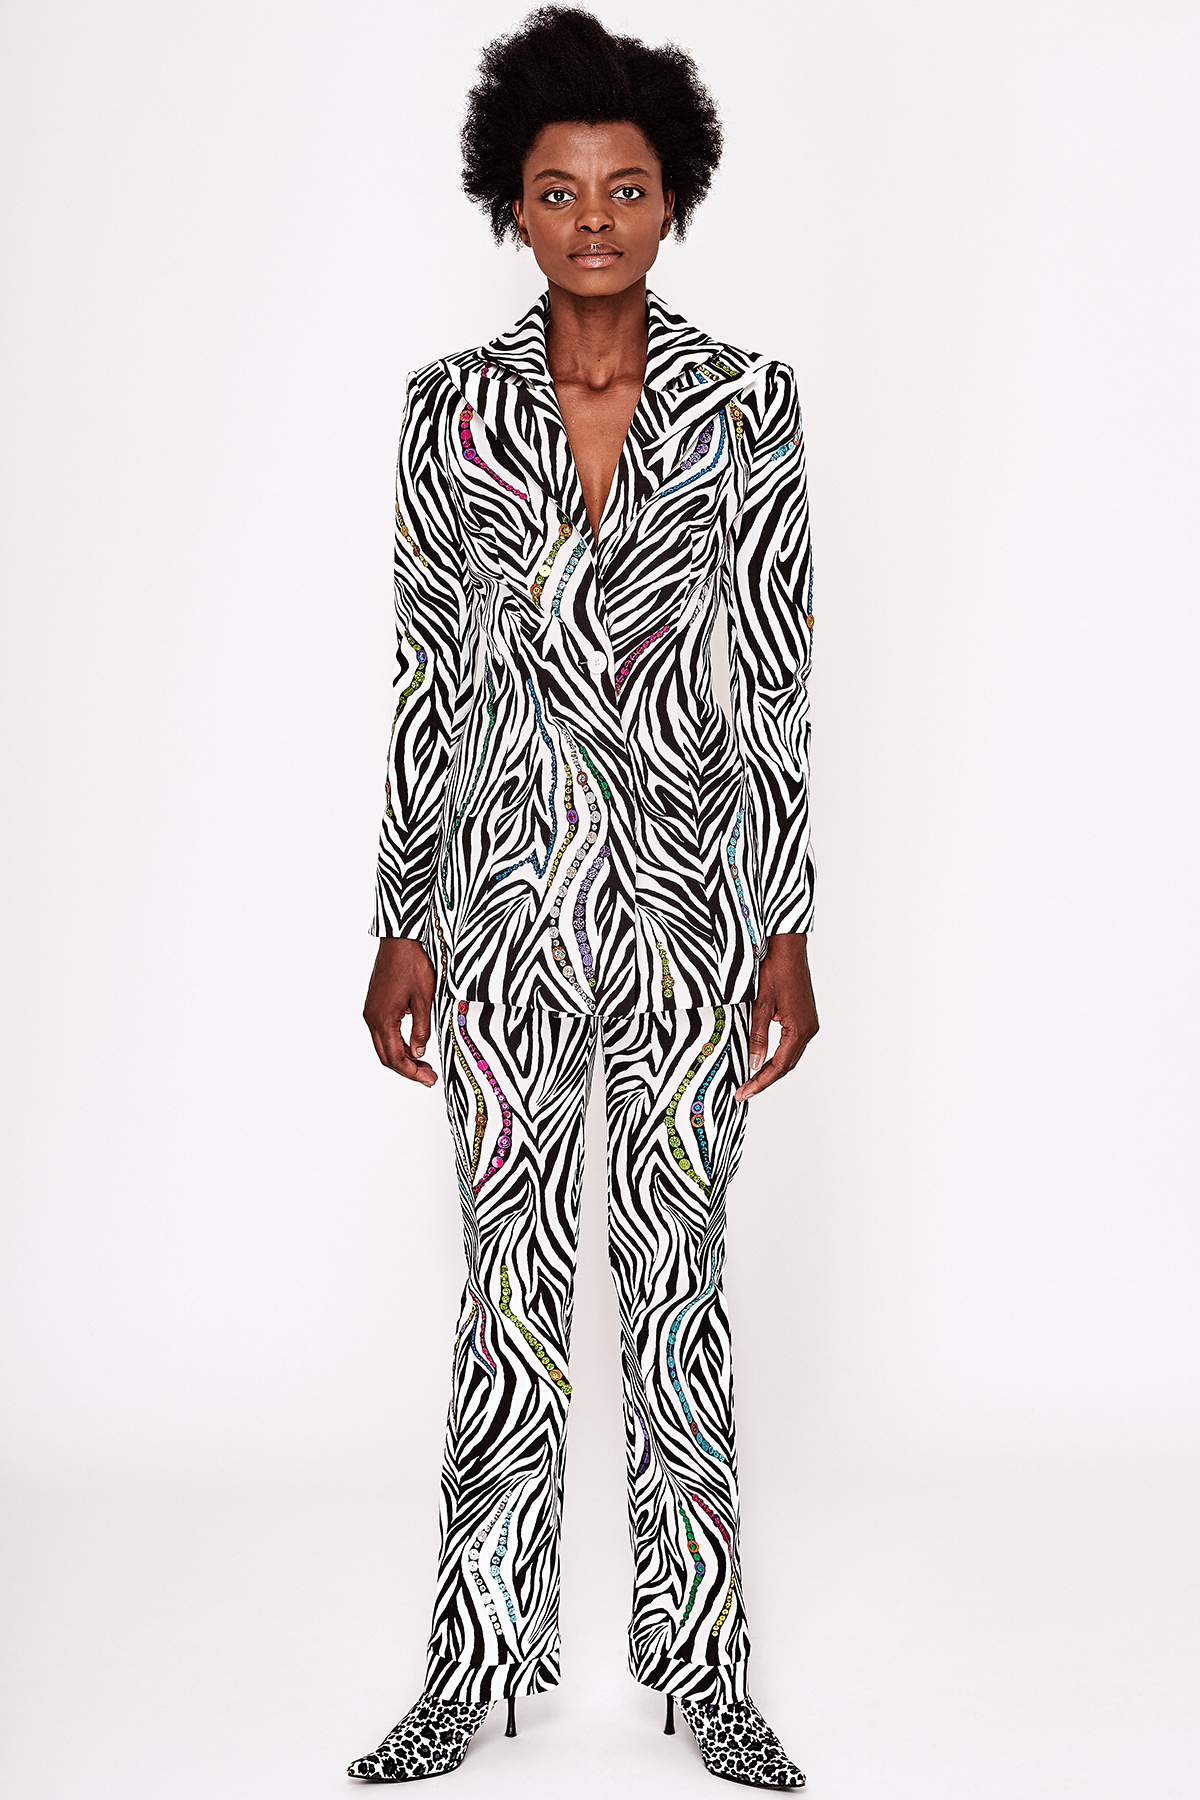 ZEBRA SUIT WITH COLORFUL MANUALLY SEWN SEQUINS - Barzoire